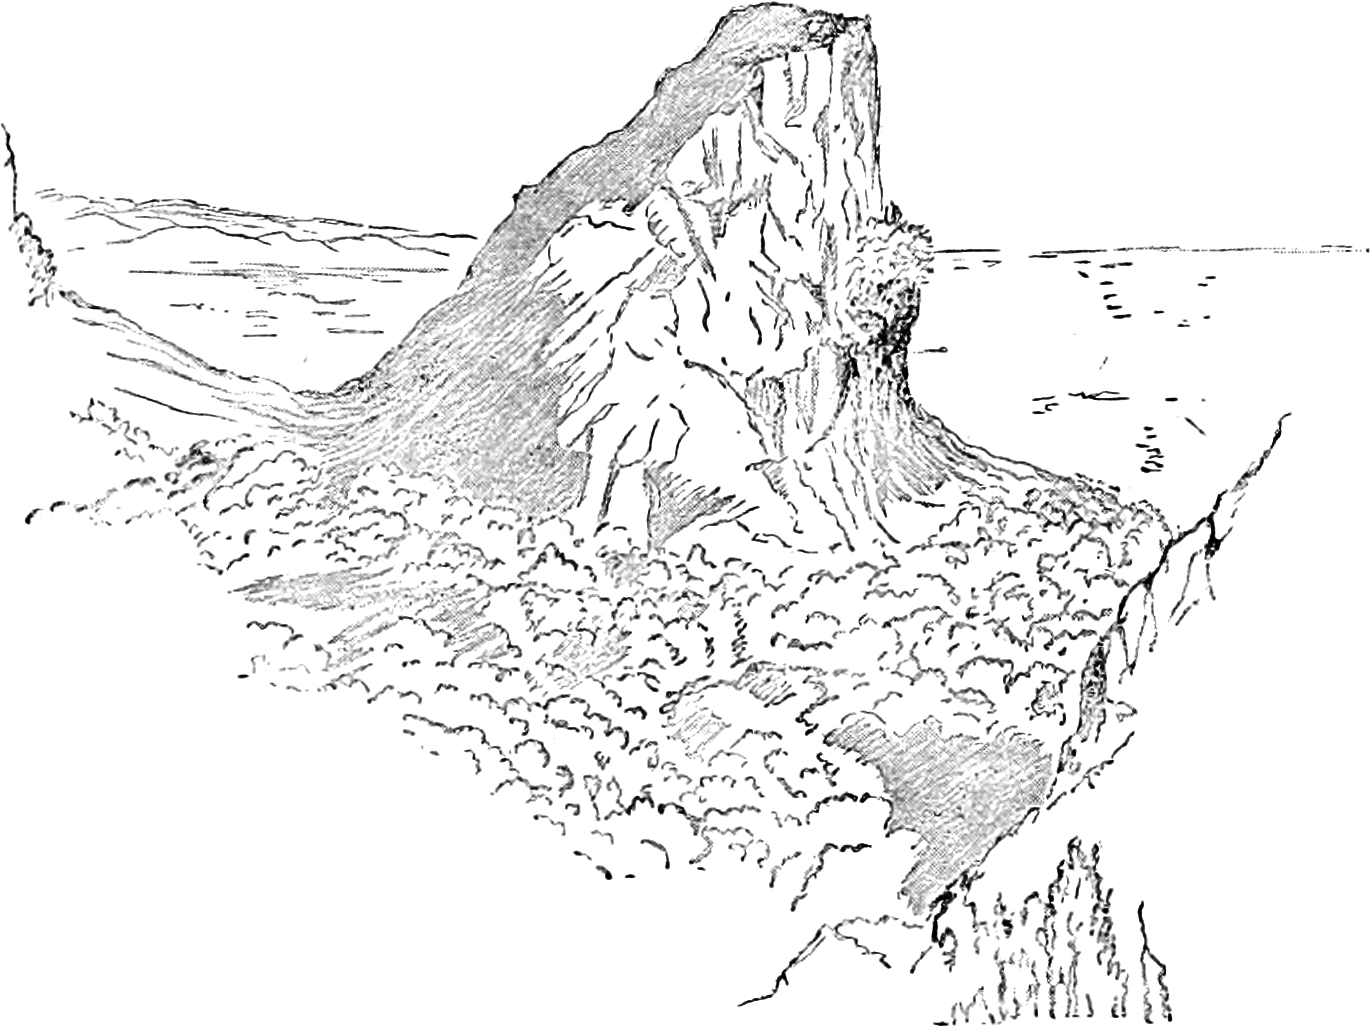 Sketch of a large, high isolated mountain rising on the left with a sheer cliff on the right, surrounded by a forest below.